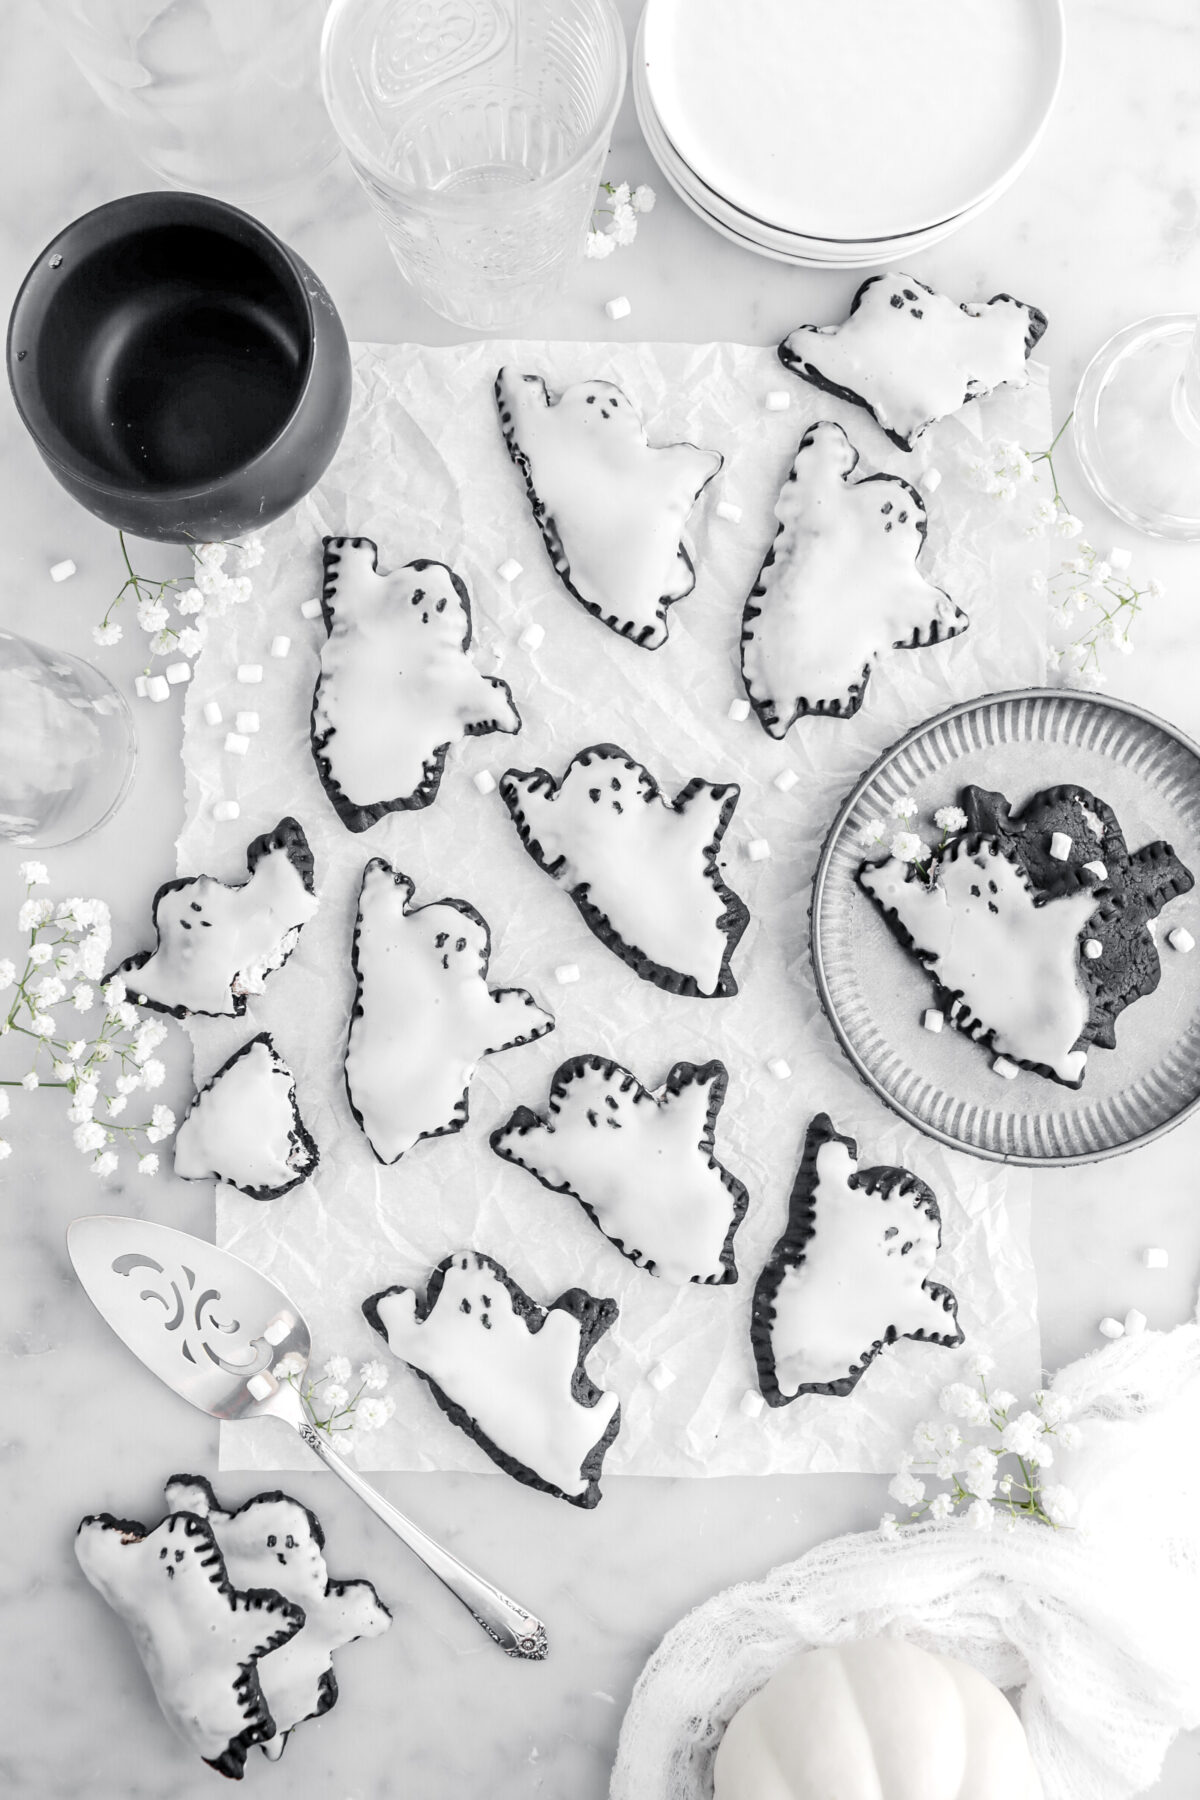 overhead image of ghost pop tarts on parchment paper with mini marshmallows and white flowers around, a black cauldron, stack of plates, and empty glasses on marble surface.